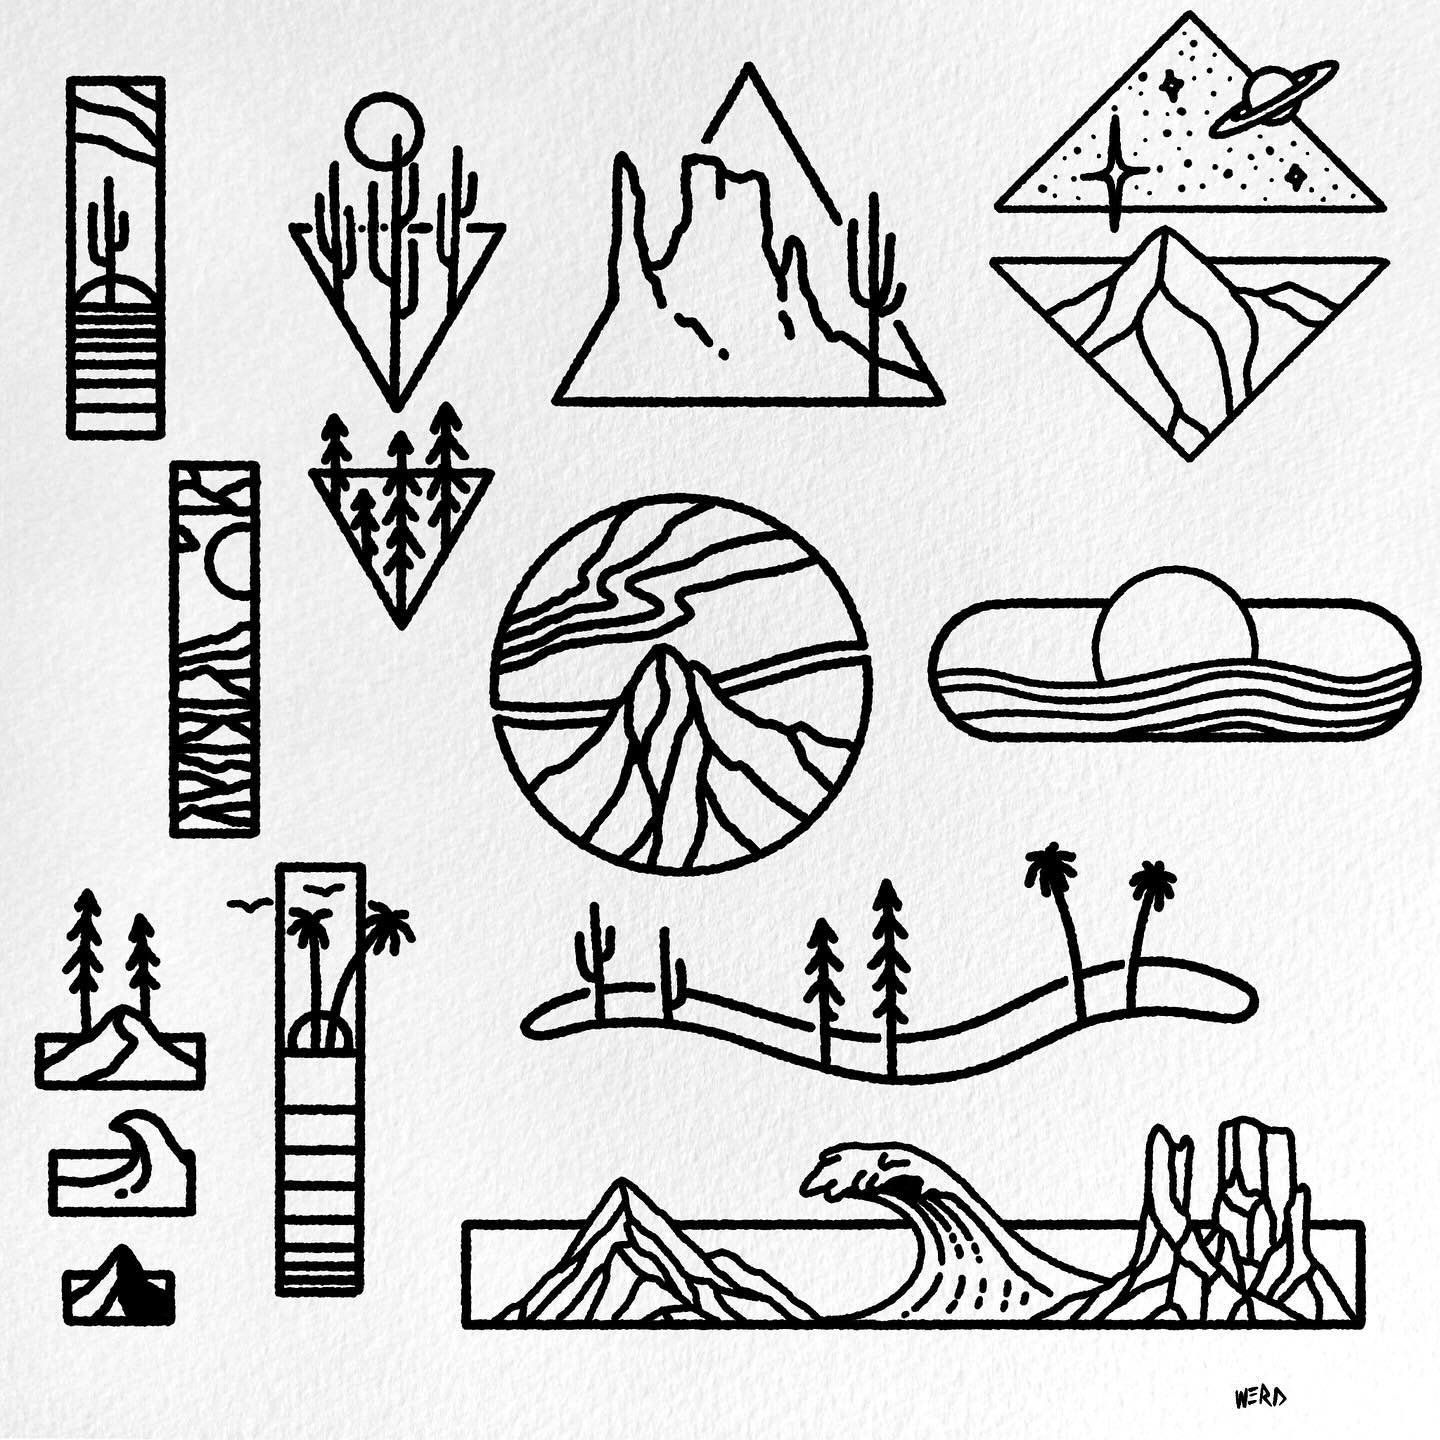 Doodle dump. Shapes, lines, and imagination. 
.
.
.
.
If you would like to use any of my designs for a tattoo, please support my work and purchase a Tattoo Certificate from my website. Use the product like on the post or link in my bio. Thanks so muc